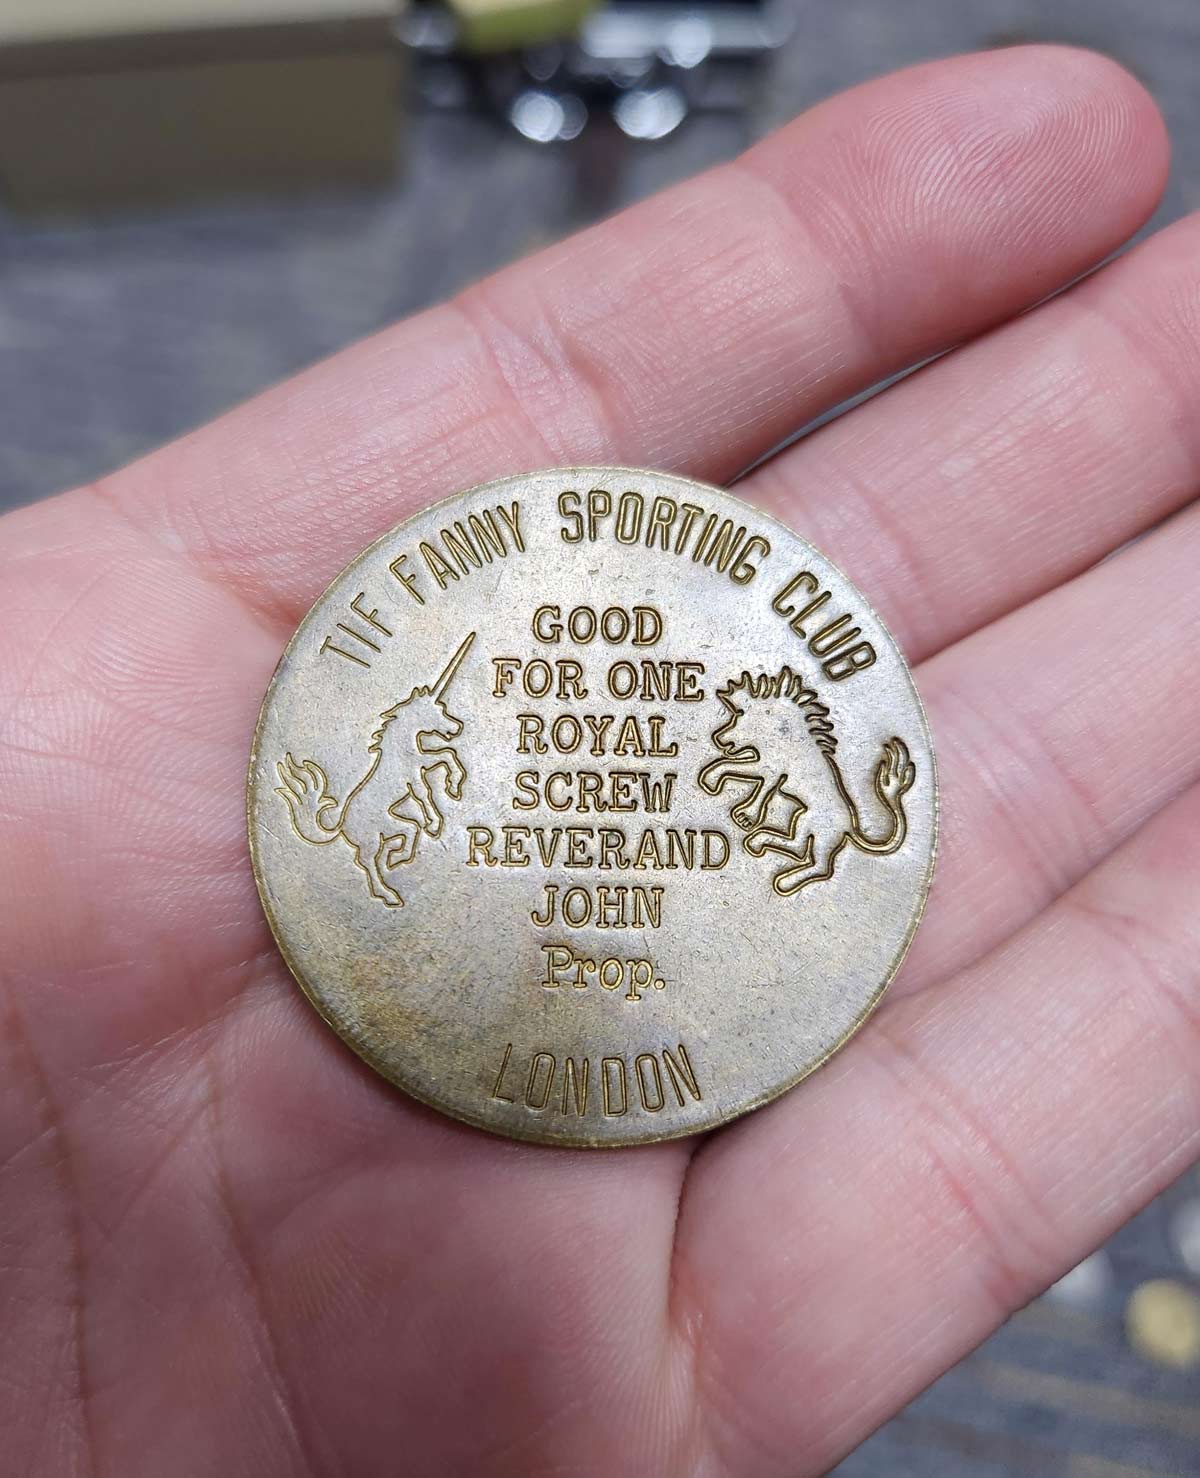 This 1920's brothel token good for "One Royal Screw"